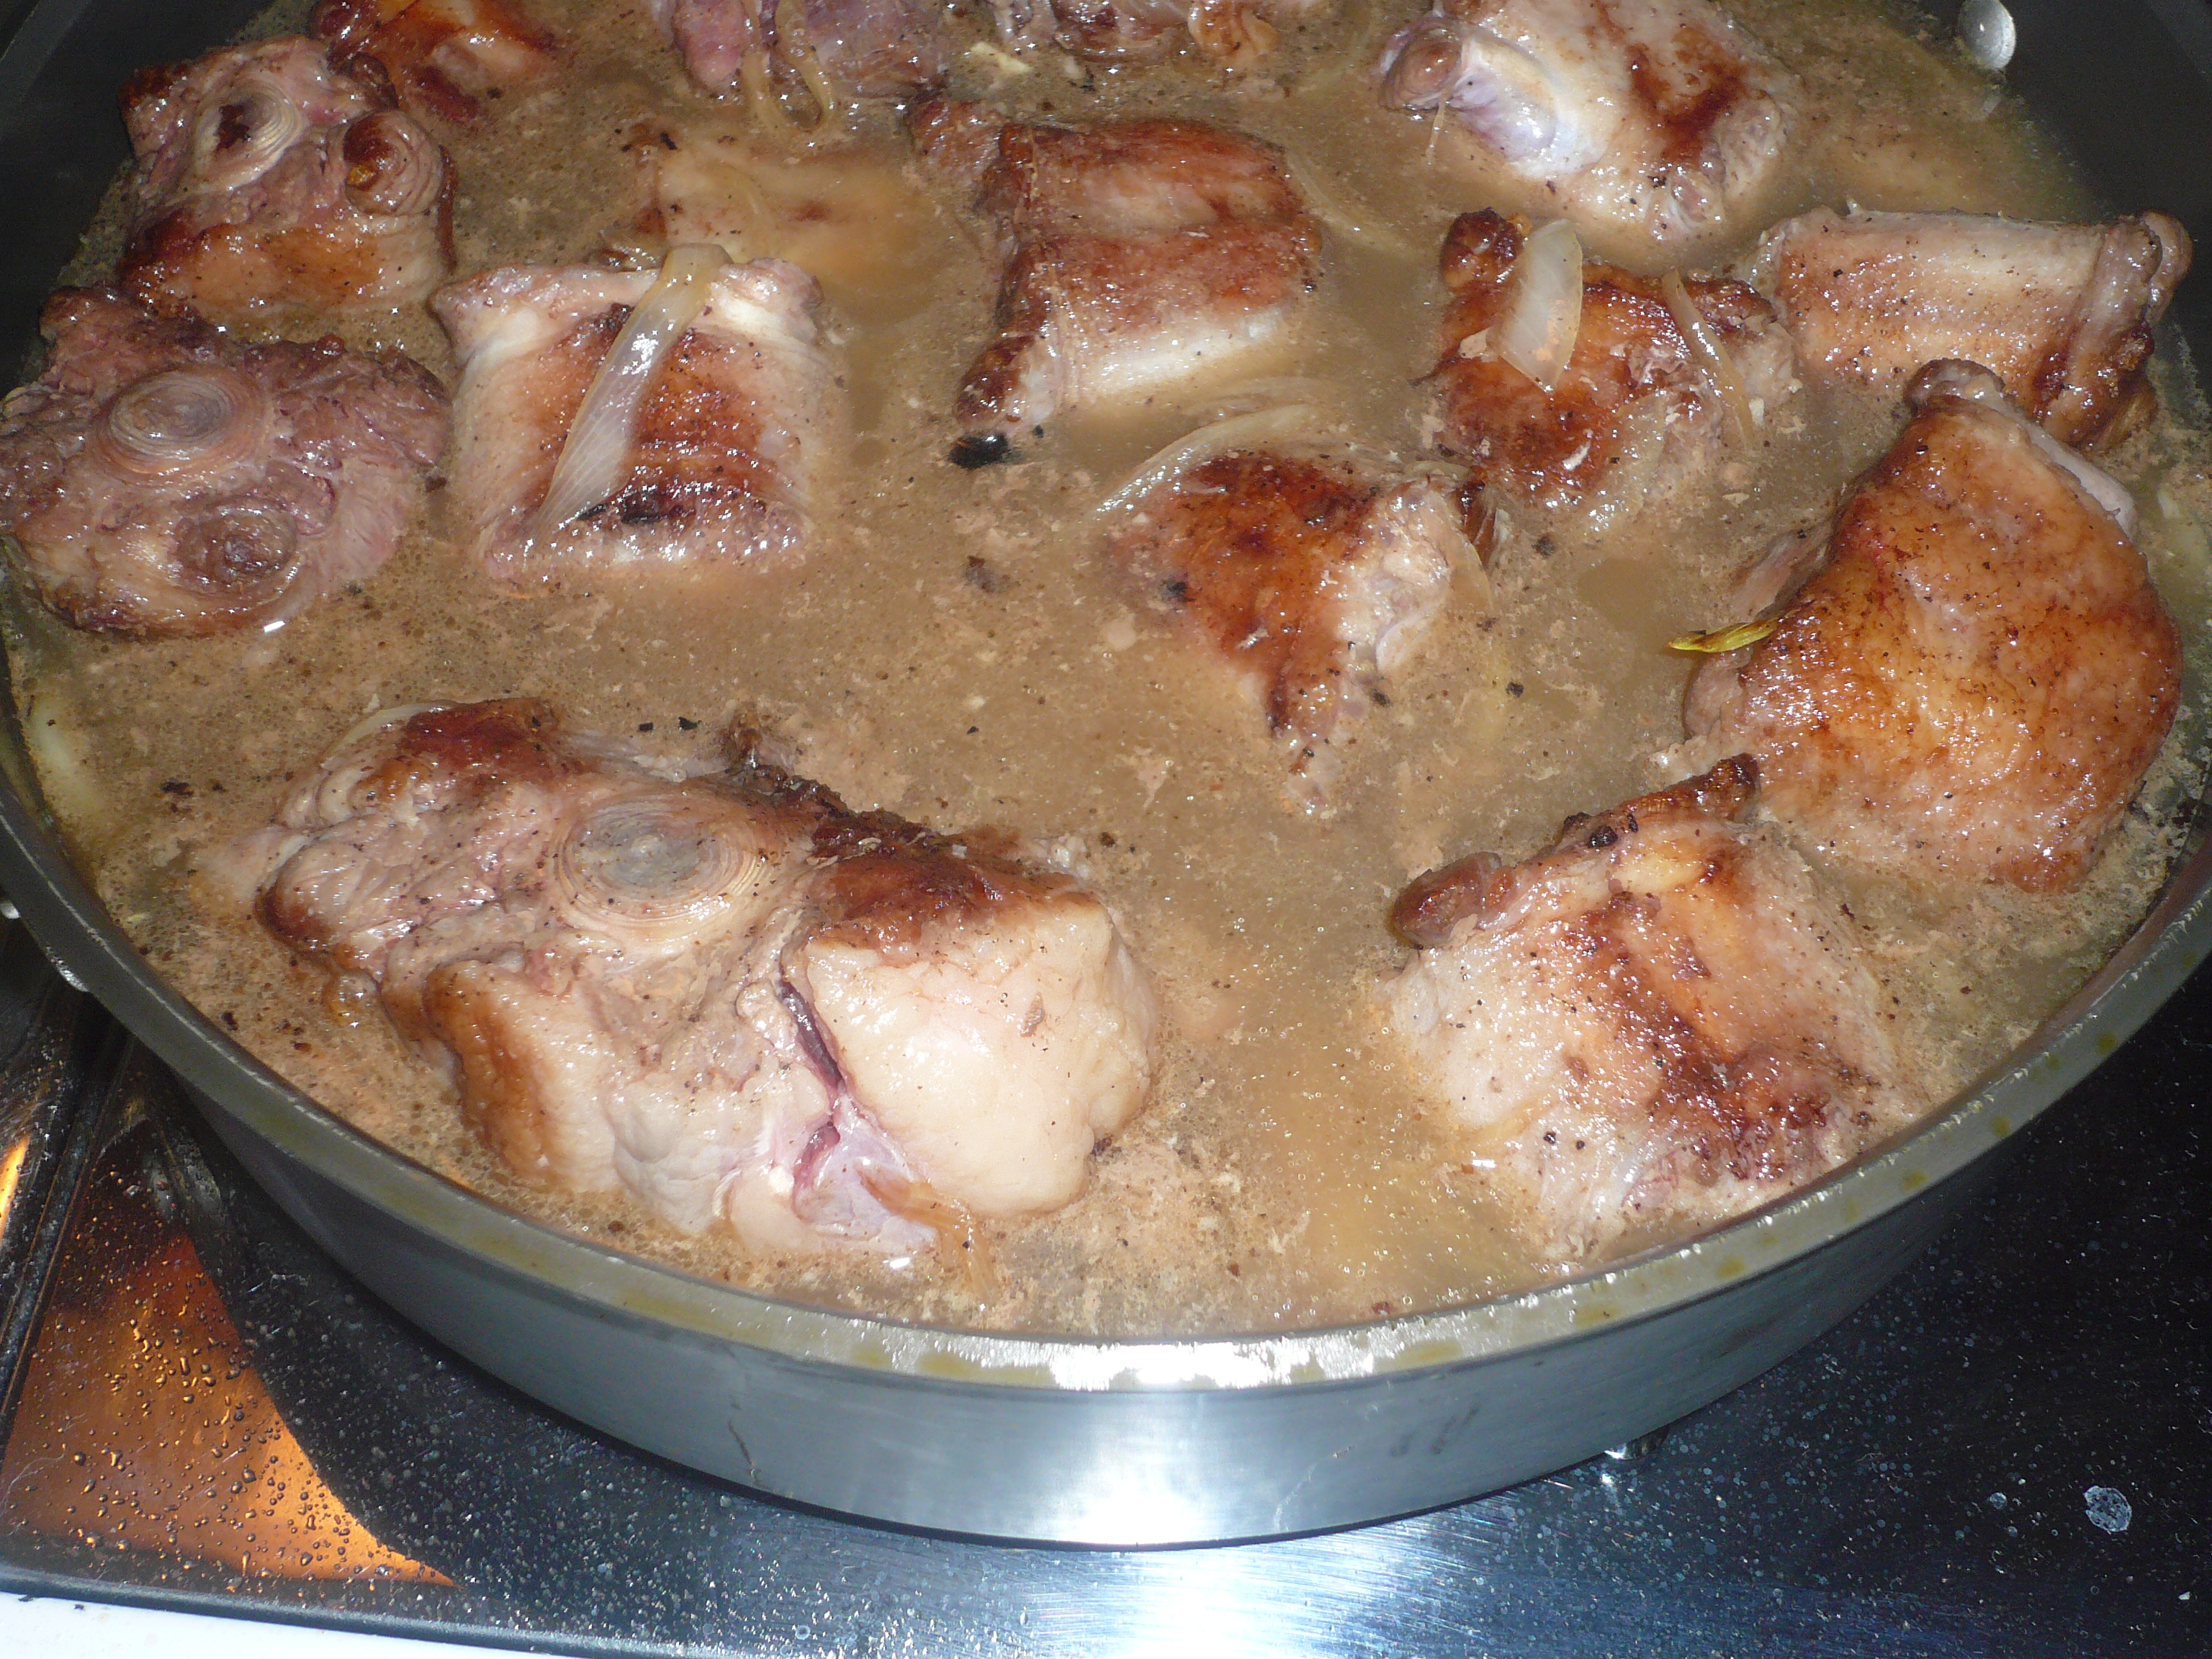 Braising the oxtails